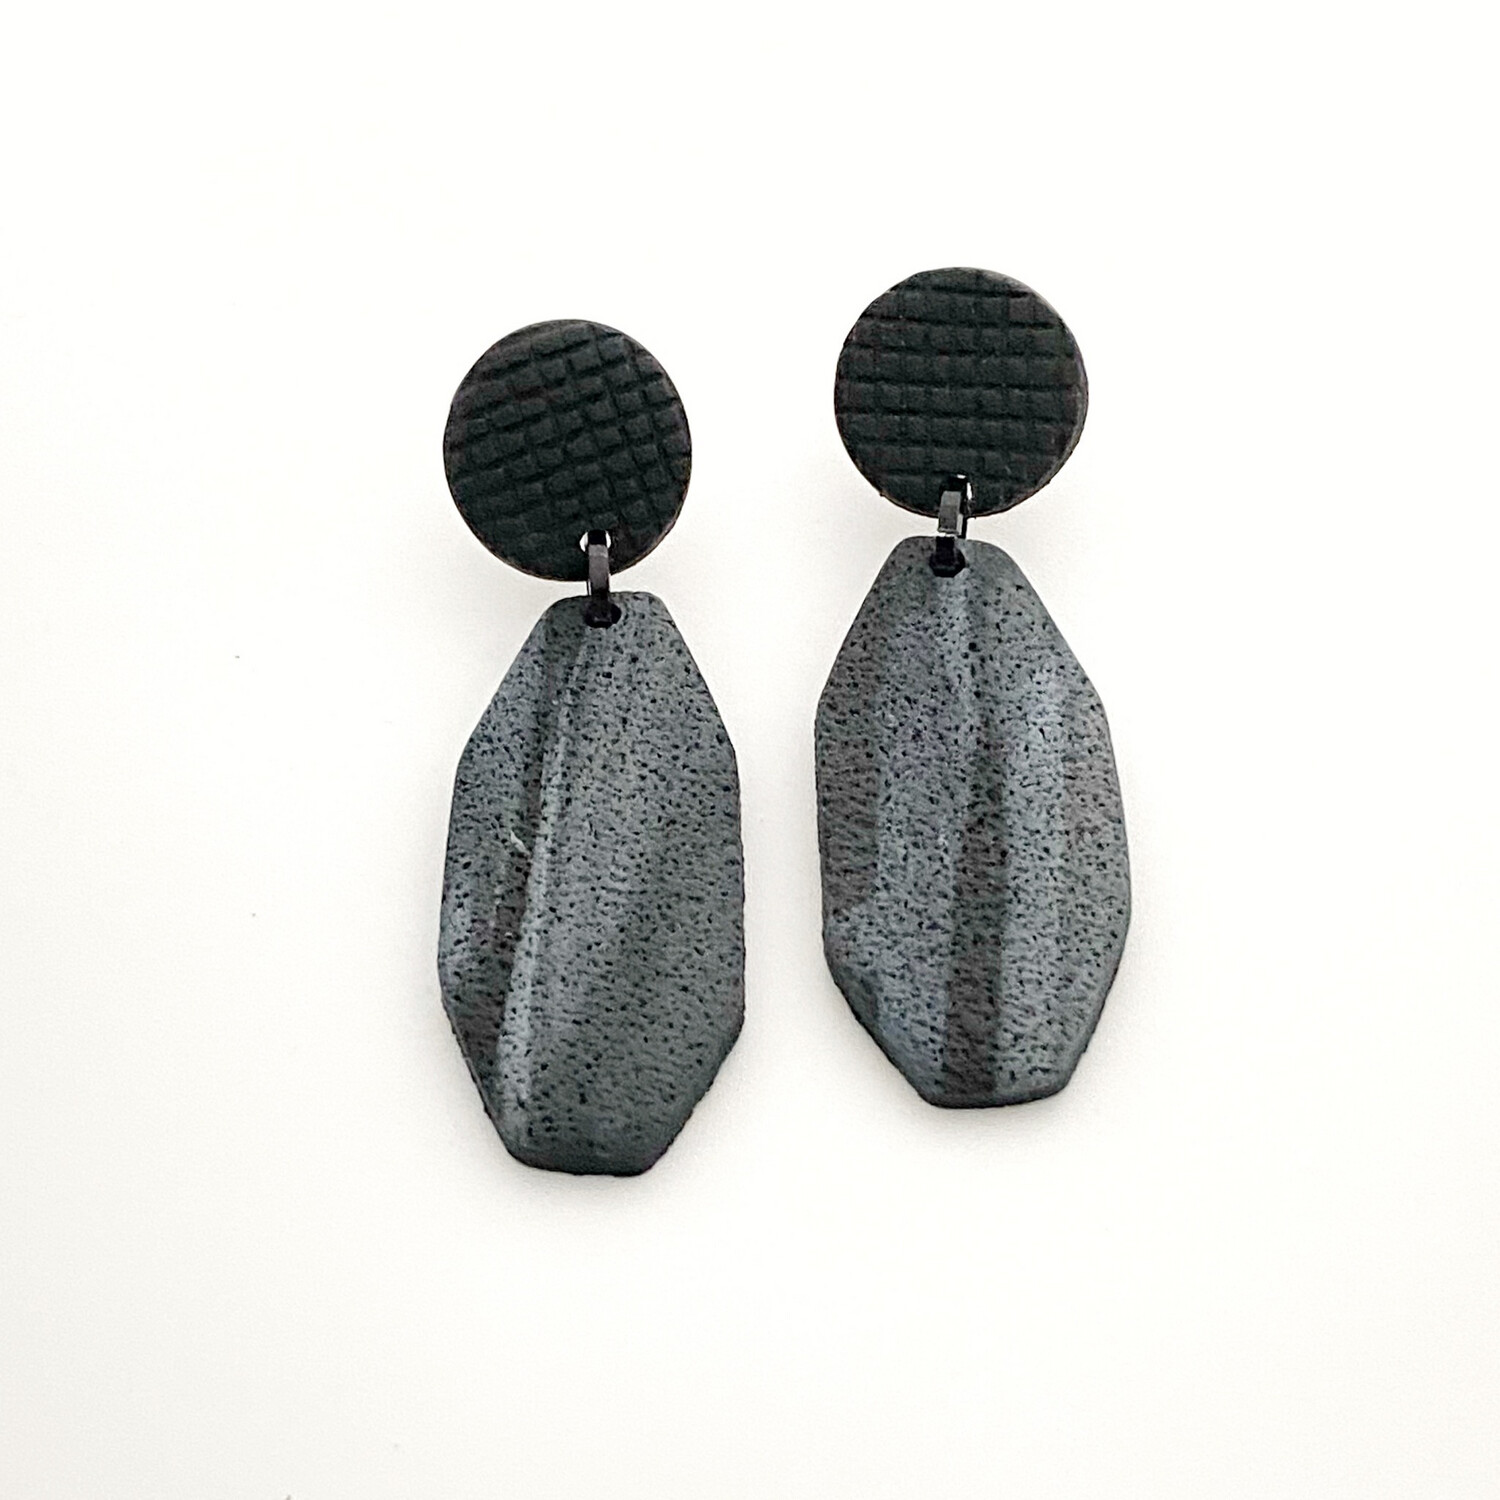 Clay Earrings,One of a kind